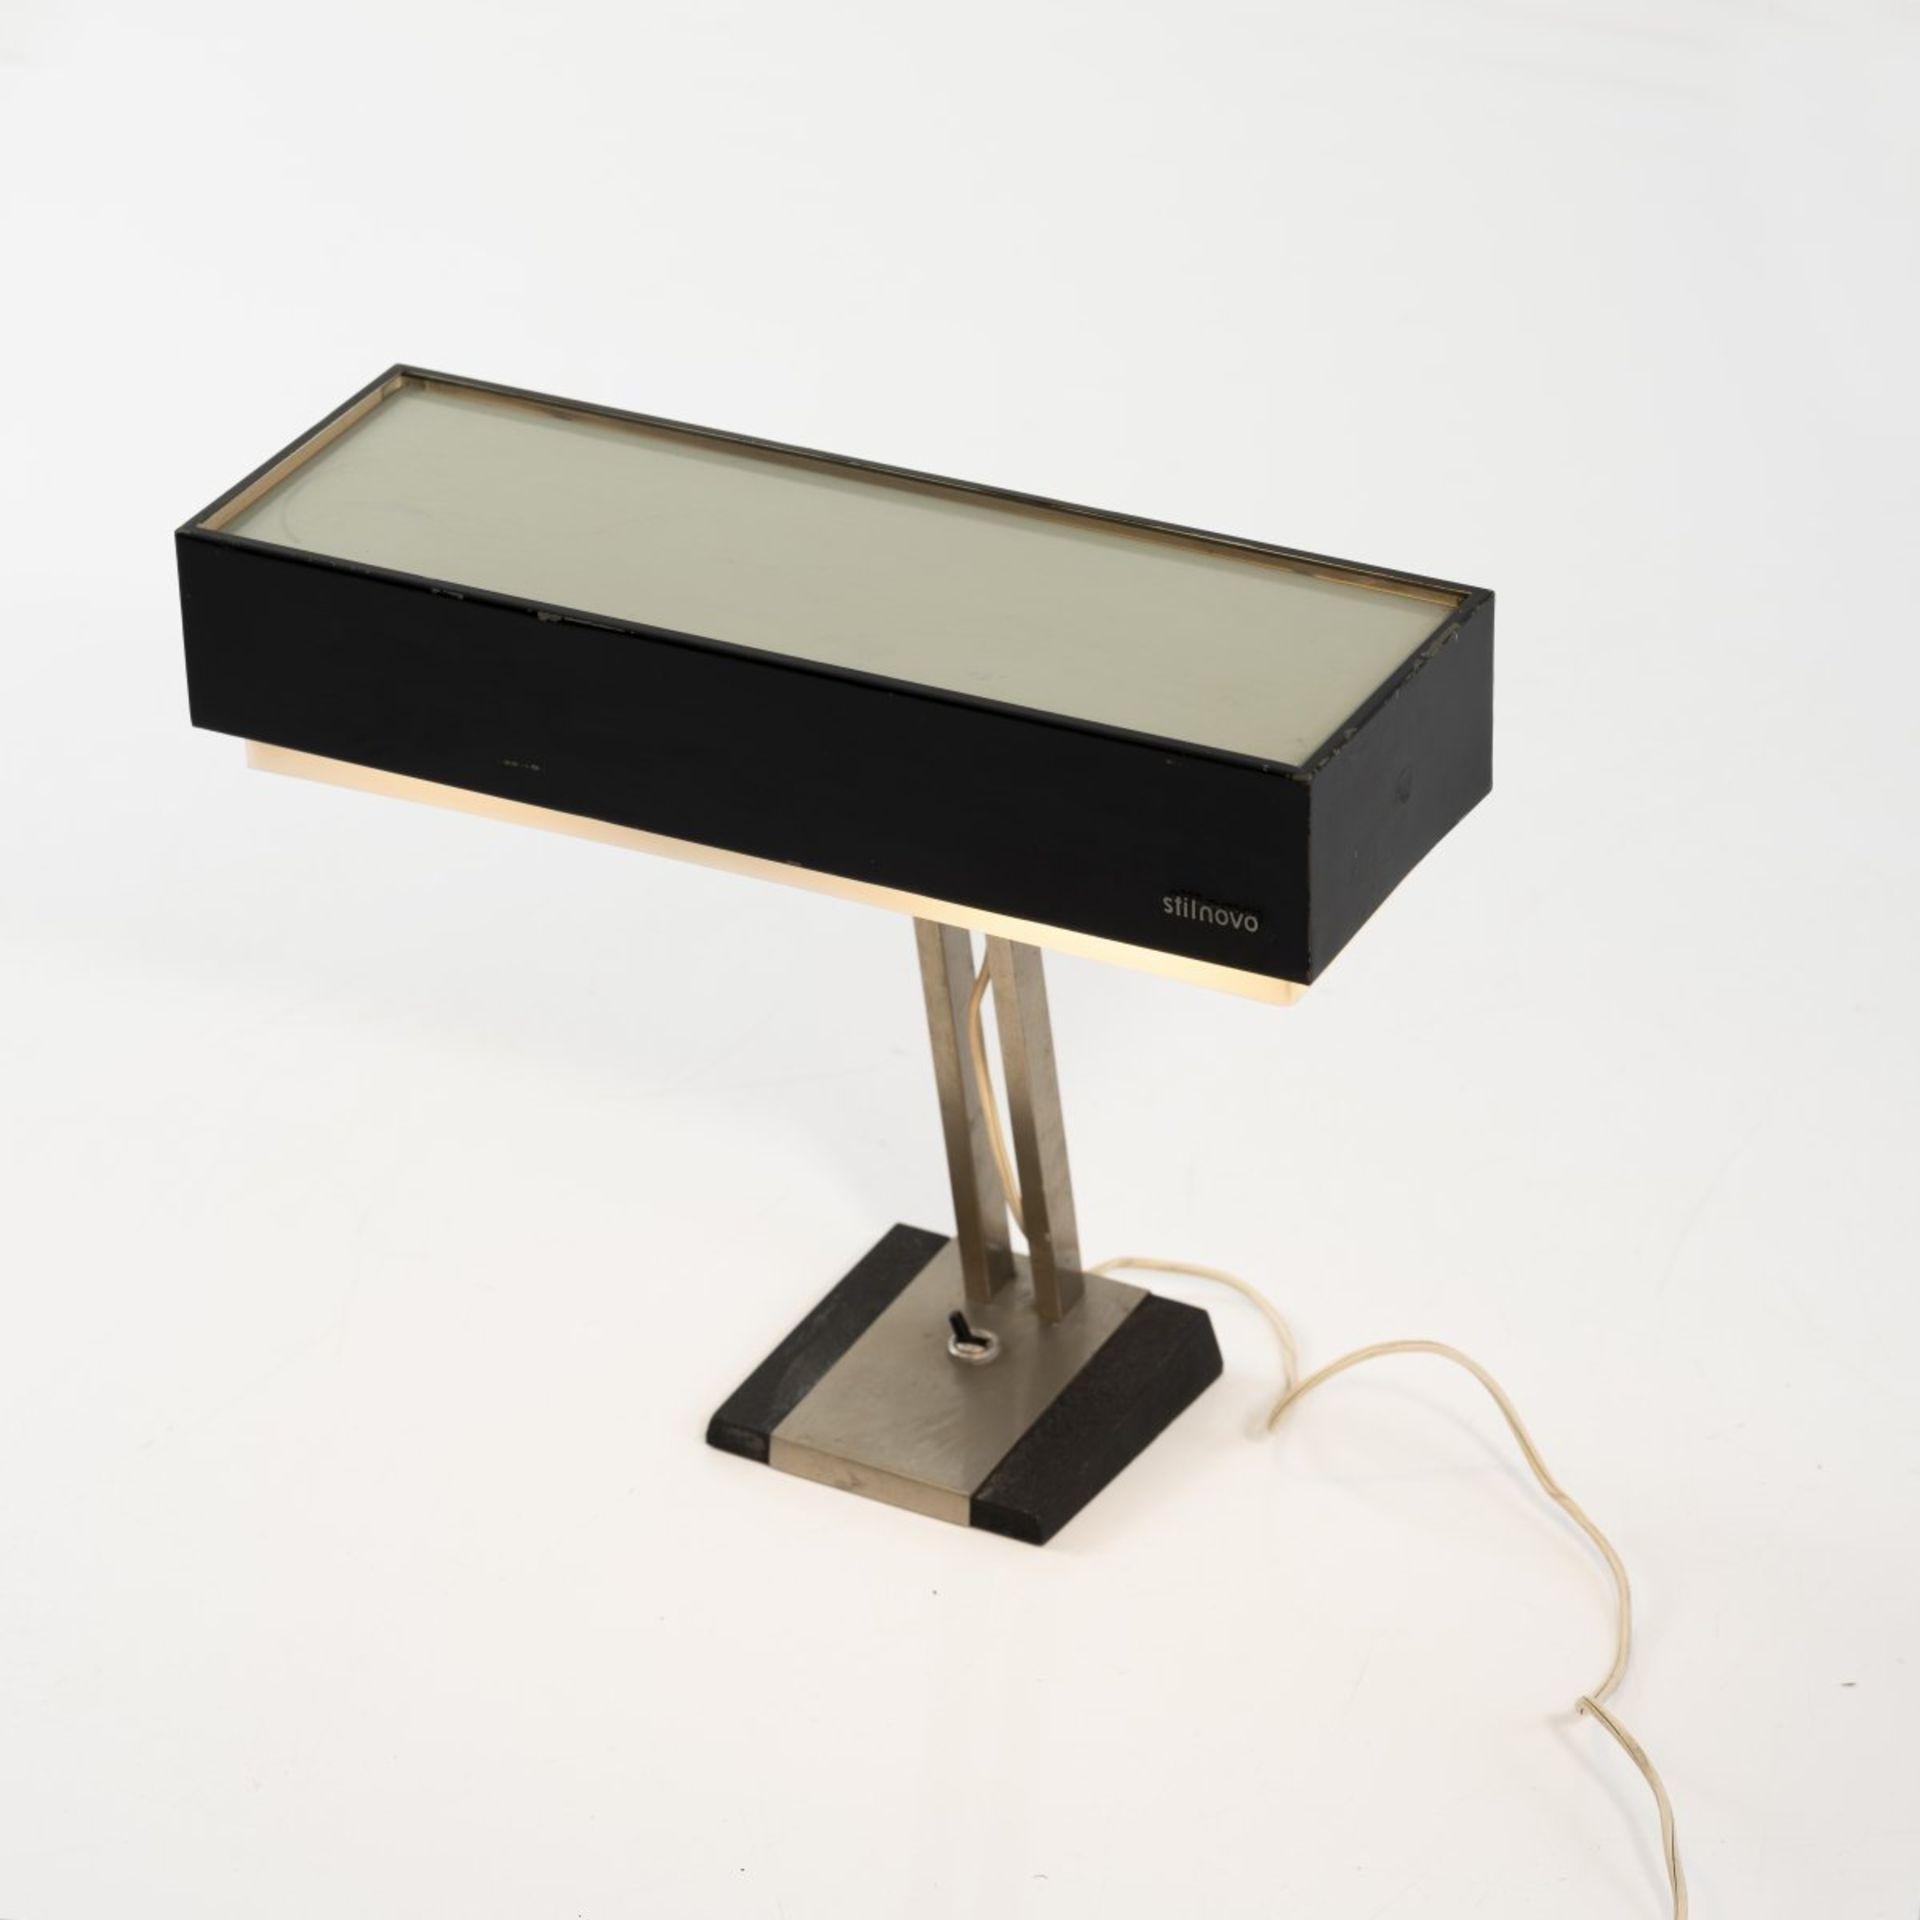 Stilnovo table light is an original decorative object realized in the 1960s by the Italian Factory Stilnovo, Milan.

Made and created by Stilnovo. 

Marked: Stilnovo.

Main materials: metal tube, sheet metal, painted black and grey, acrylic